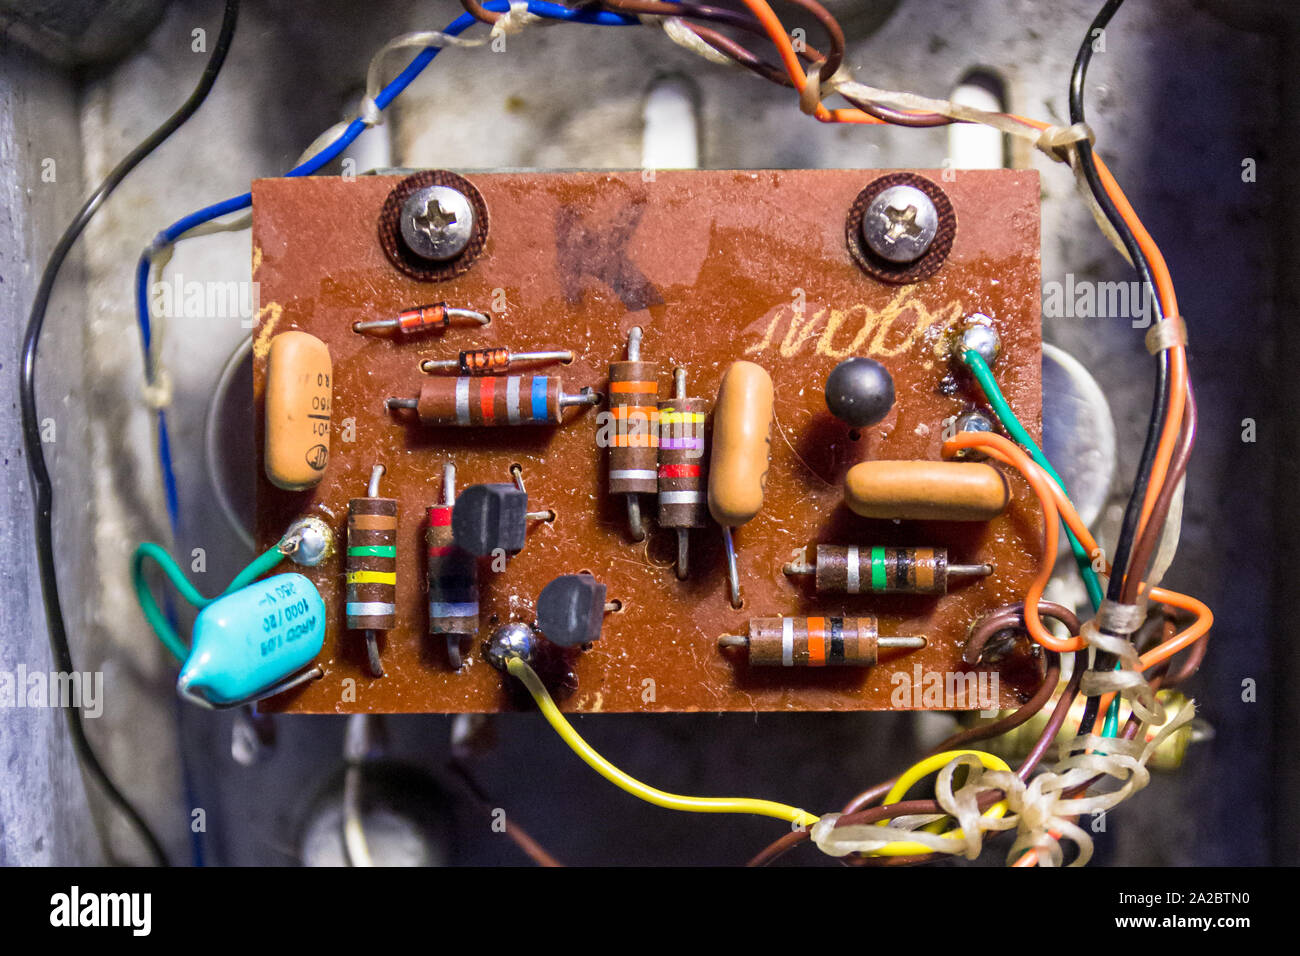 Fuzz Pedal Circuit High Resolution Stock Photography and Images - Alamy